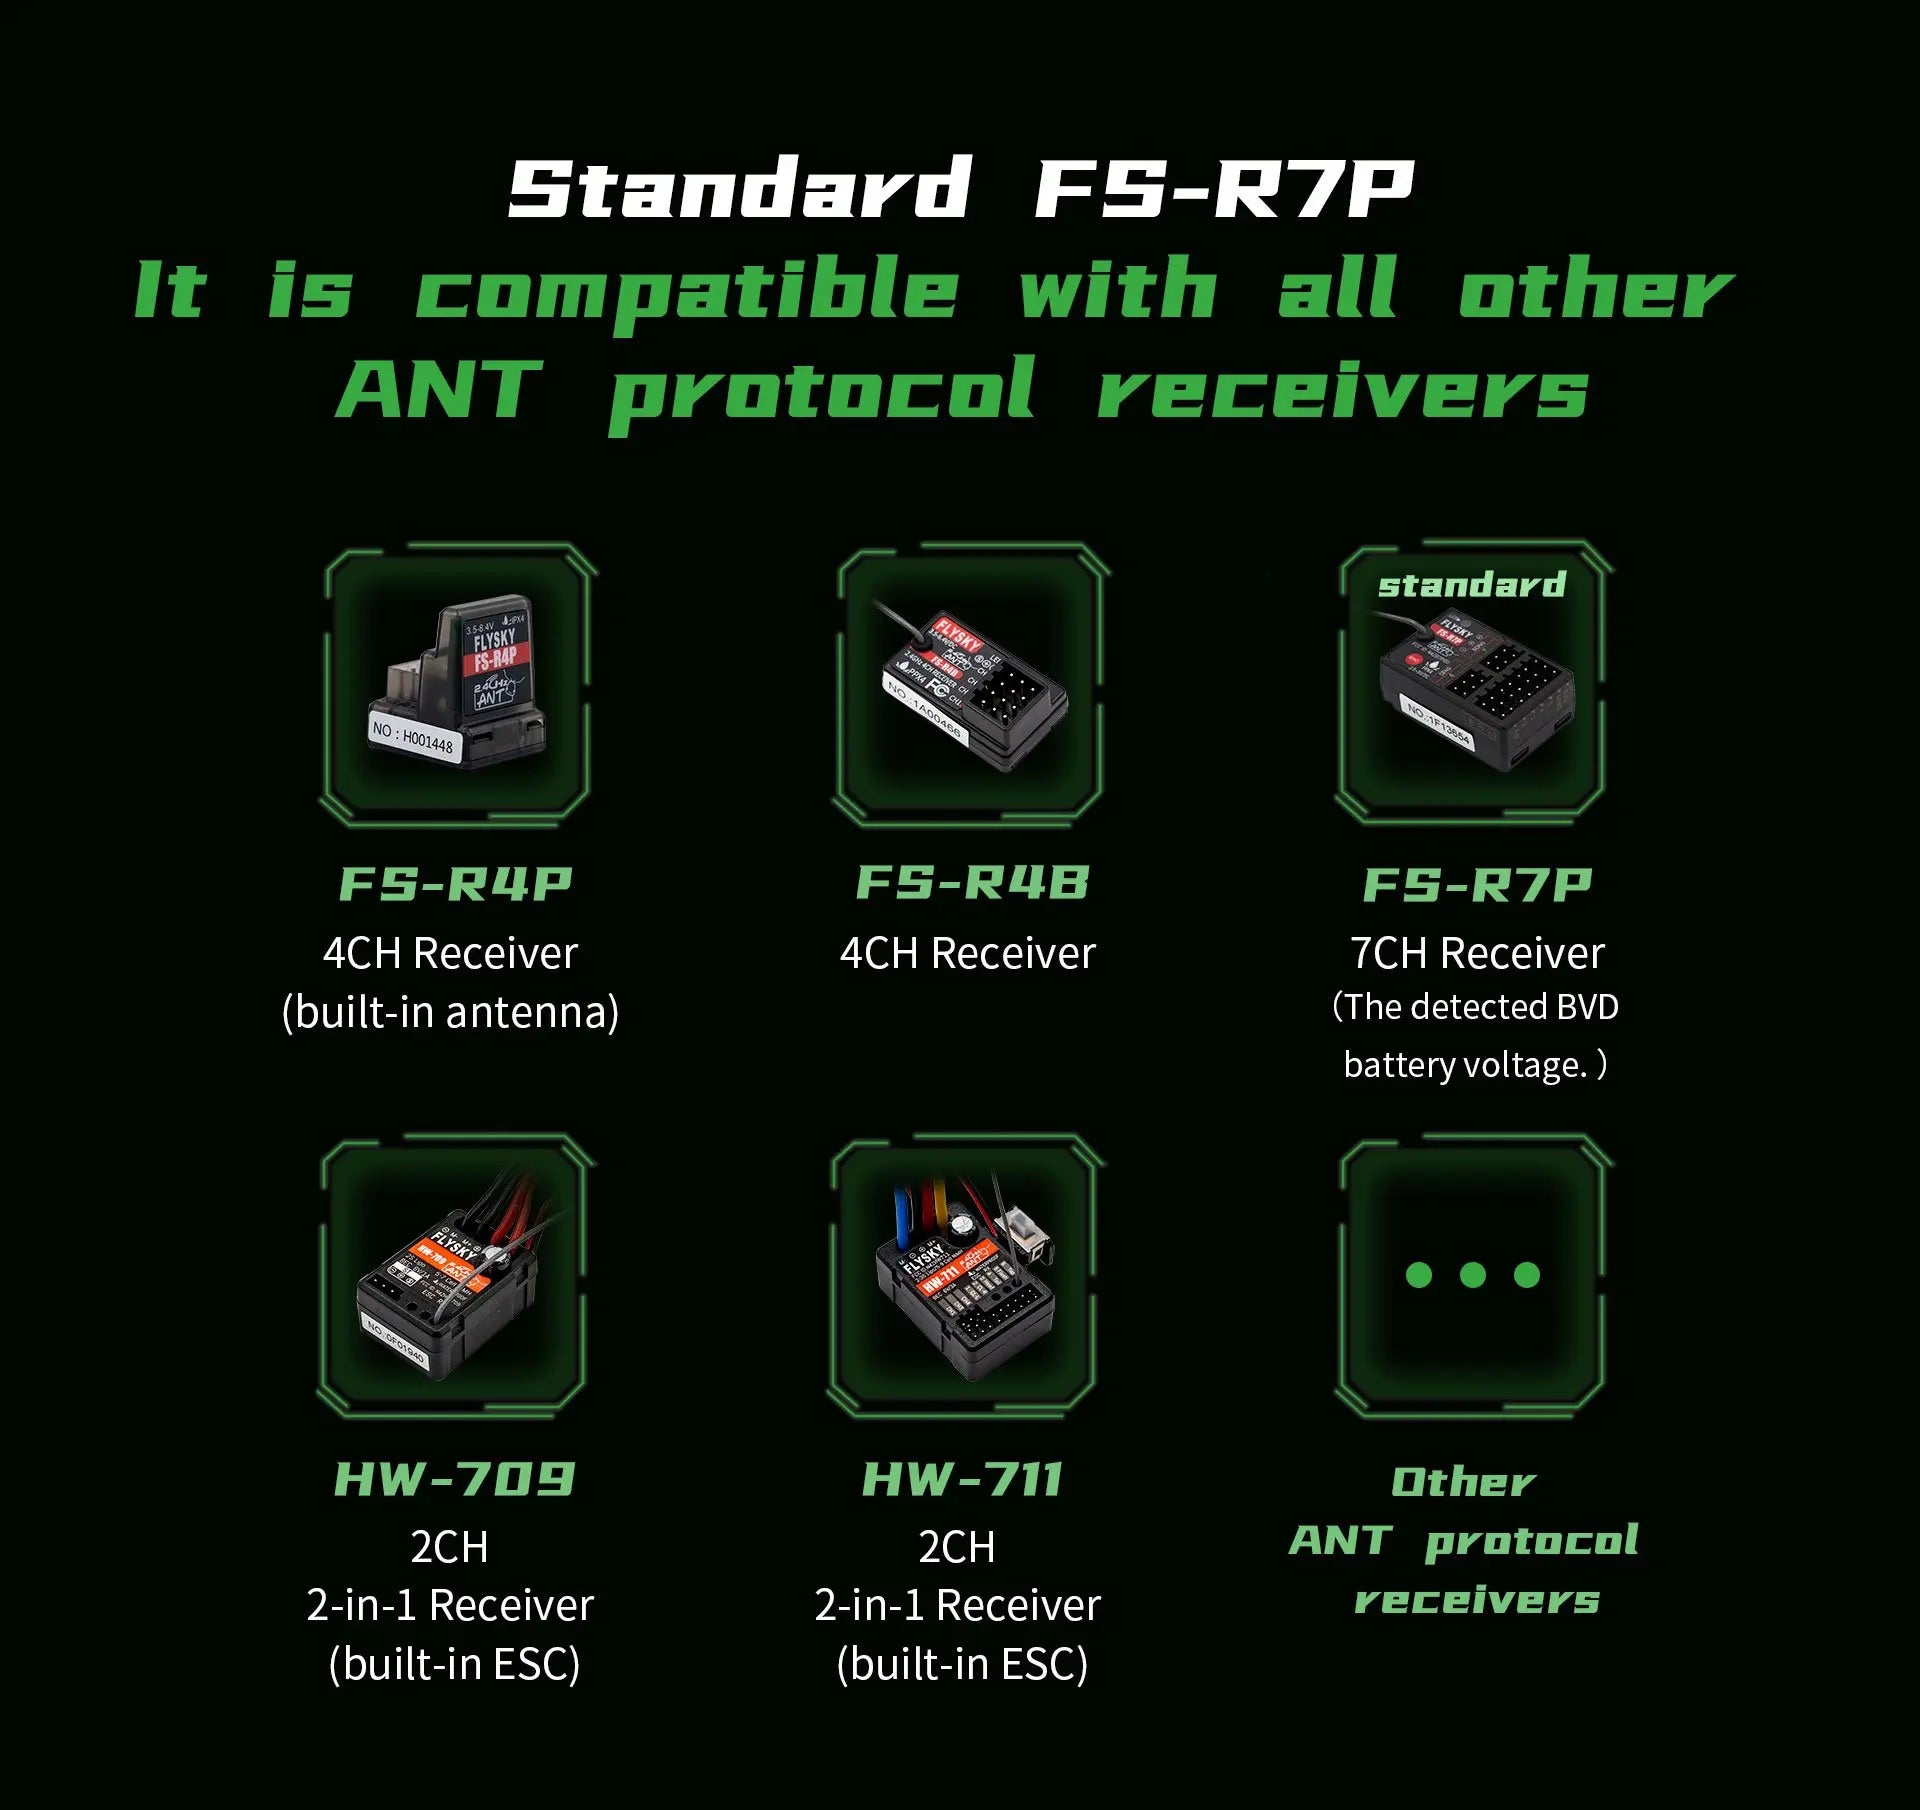 FS-RZP is compatible with all other ANT protocol receivers standard 04u